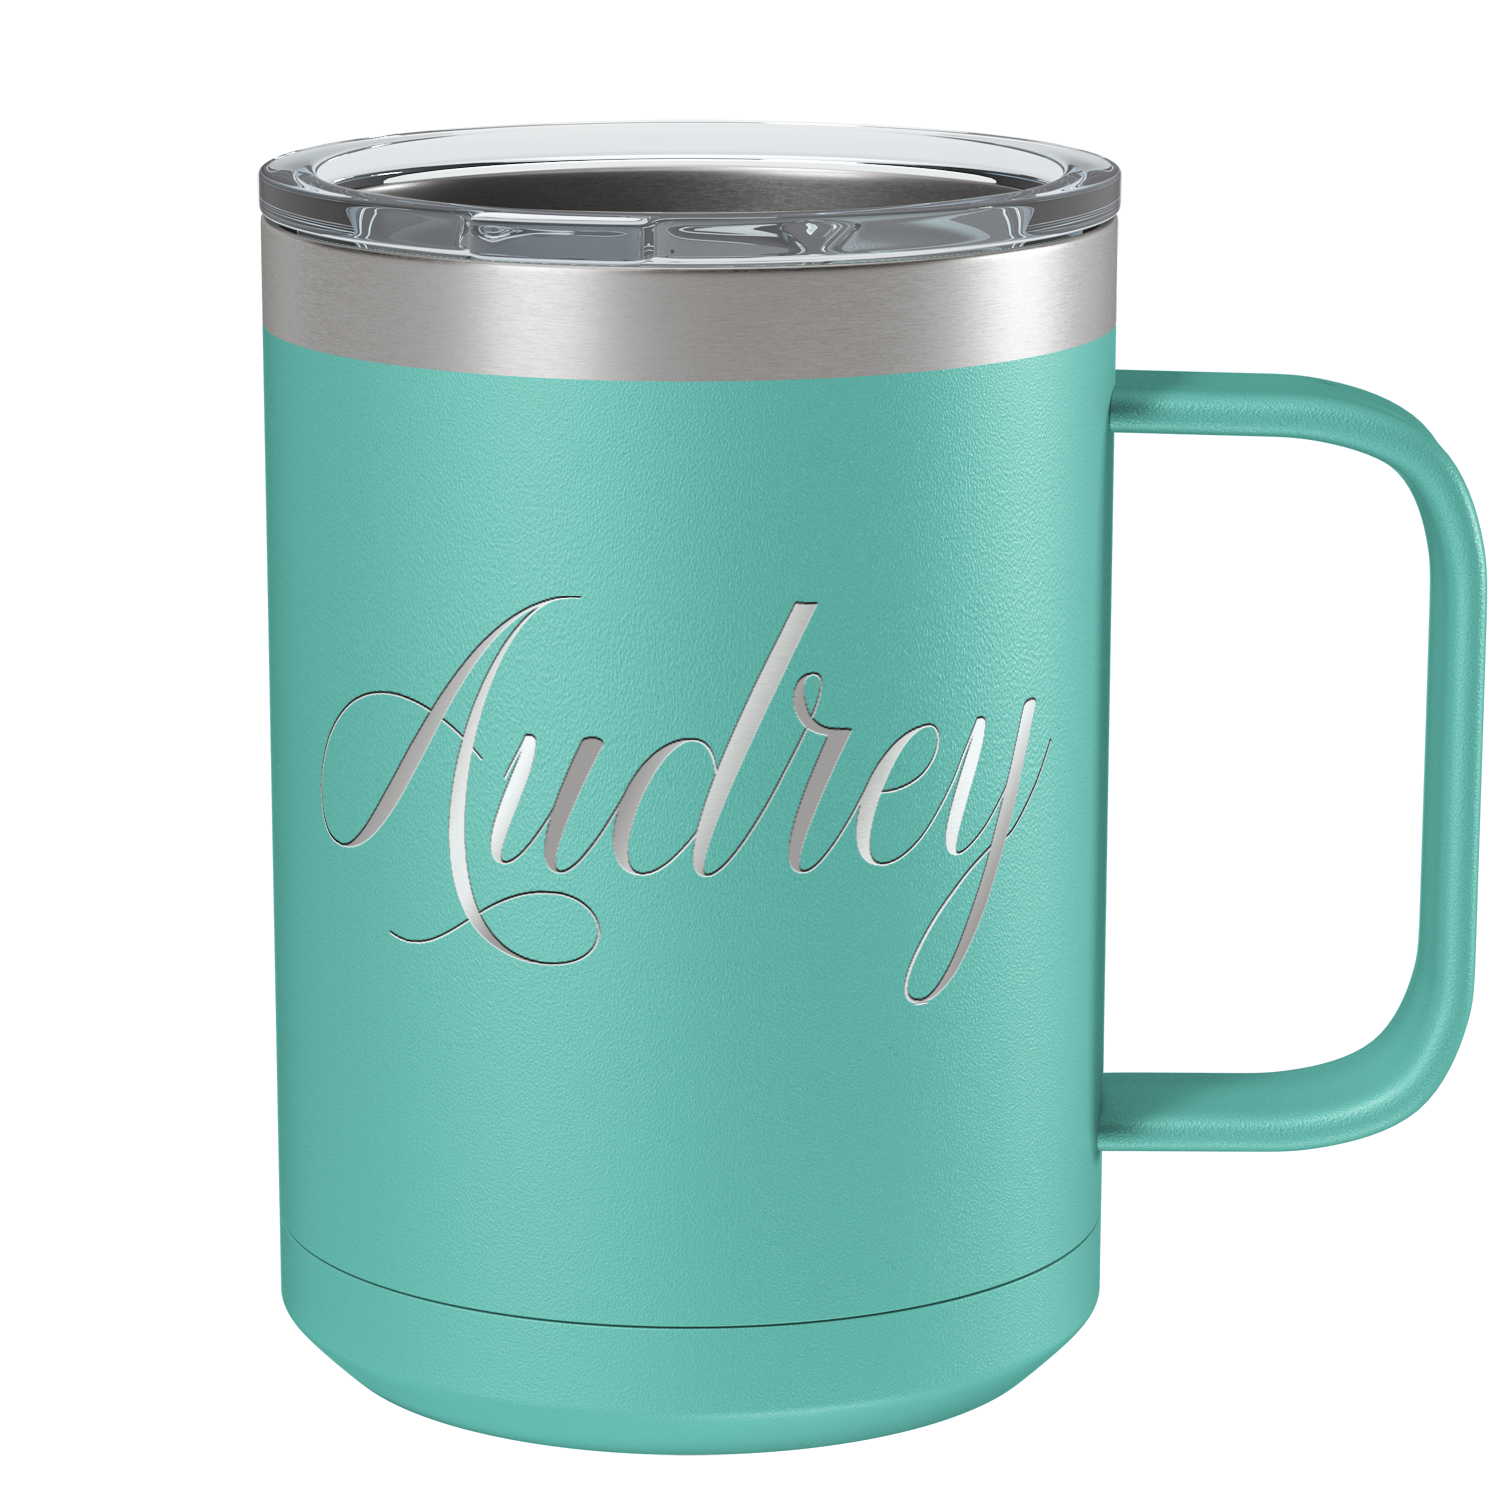 Cuptify Personalized Engraved 15 oz Stainless Steel Coffee Mug - Seafoam